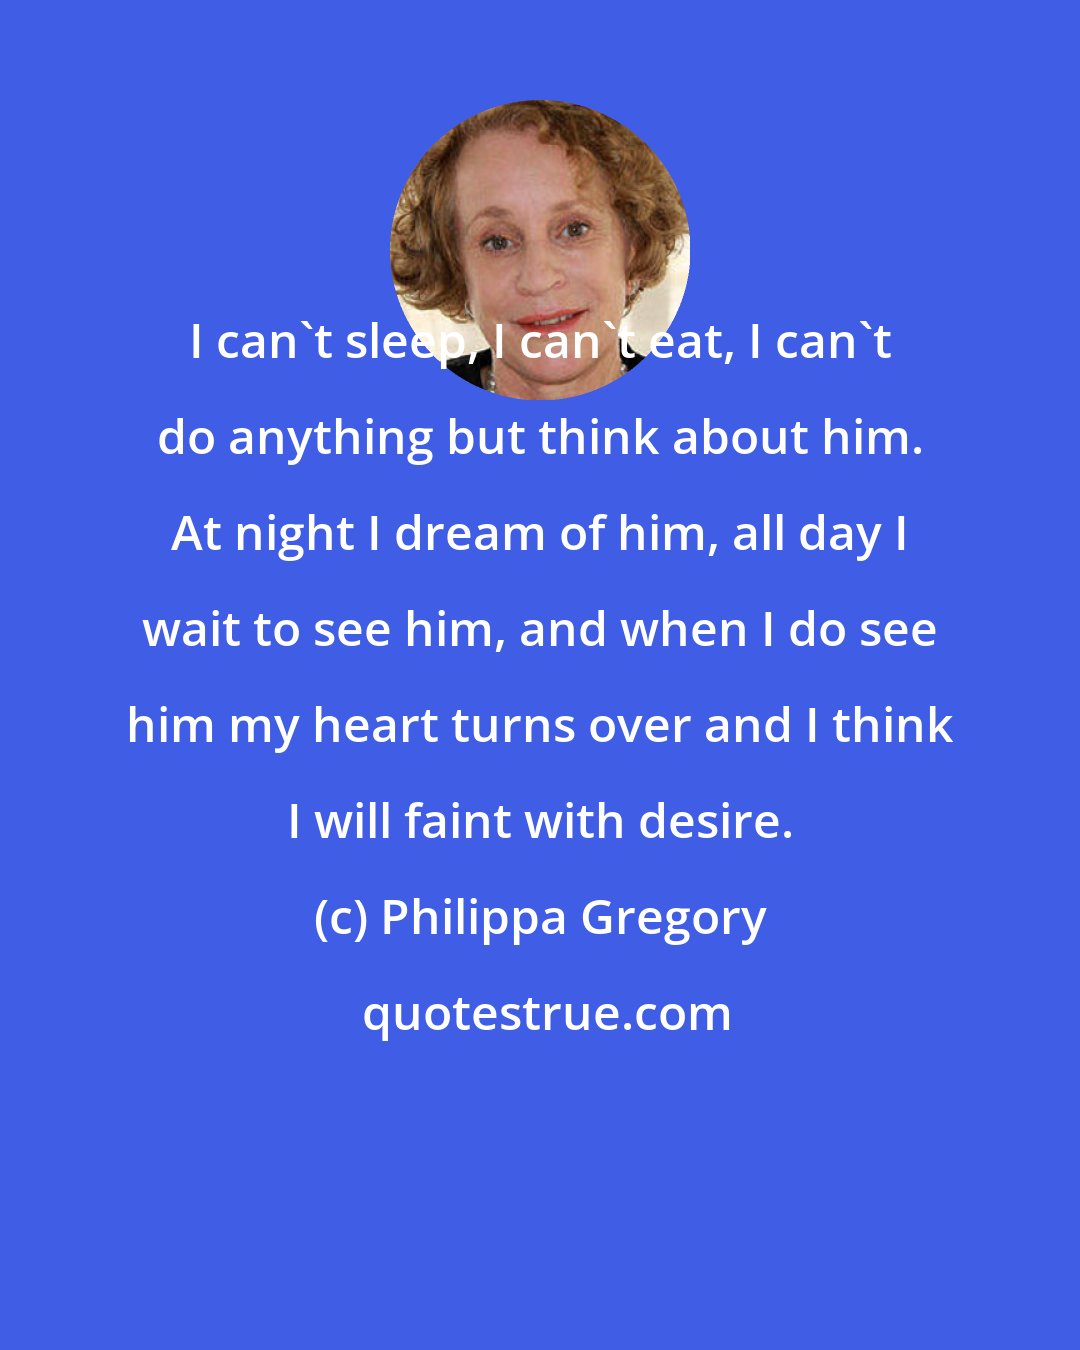 Philippa Gregory: I can't sleep, I can't eat, I can't do anything but think about him. At night I dream of him, all day I wait to see him, and when I do see him my heart turns over and I think I will faint with desire.